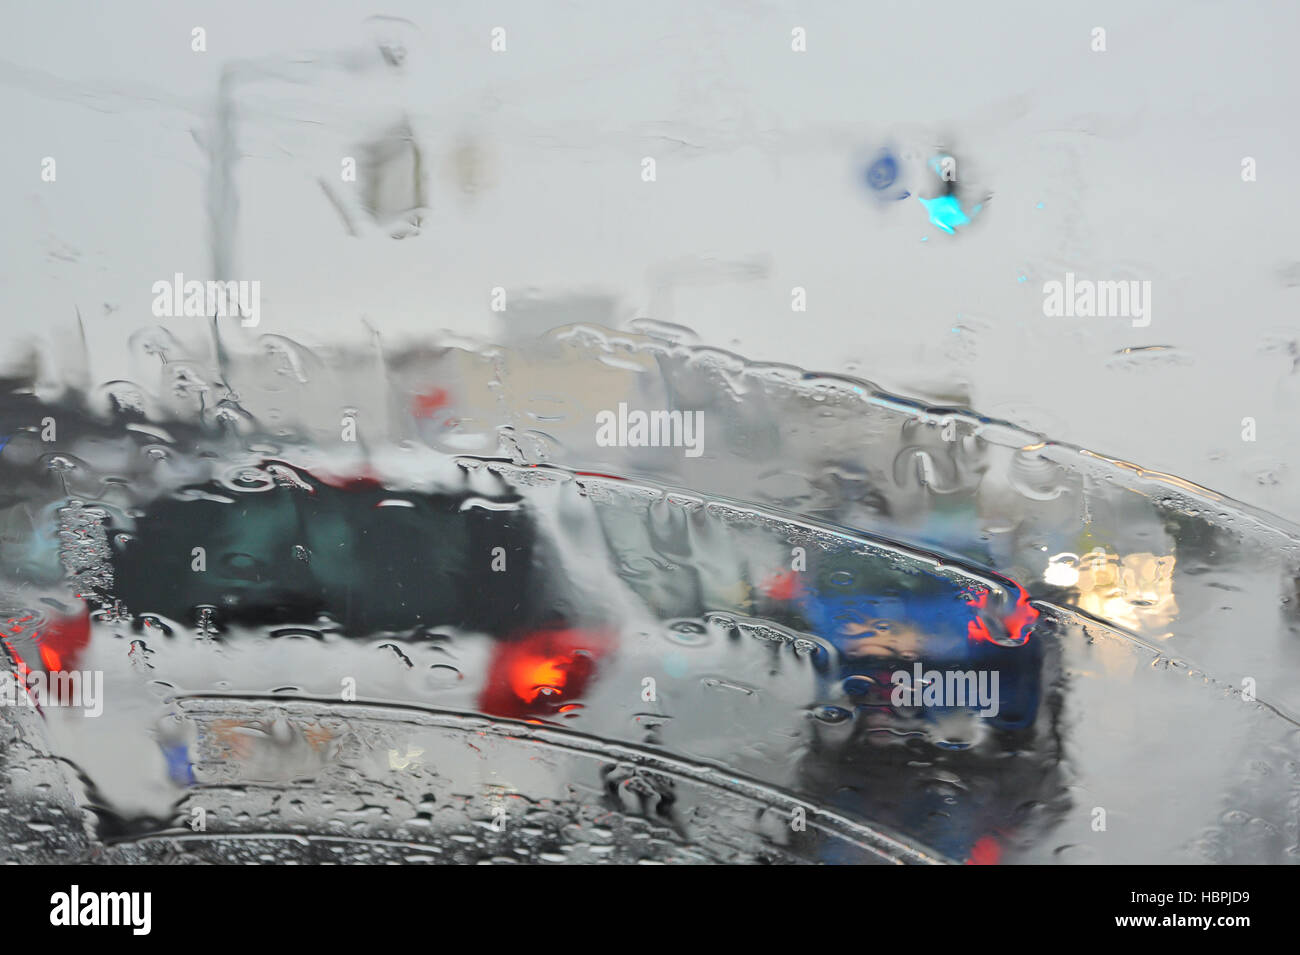 Rainy weather on the road with vehicles Stock Photo